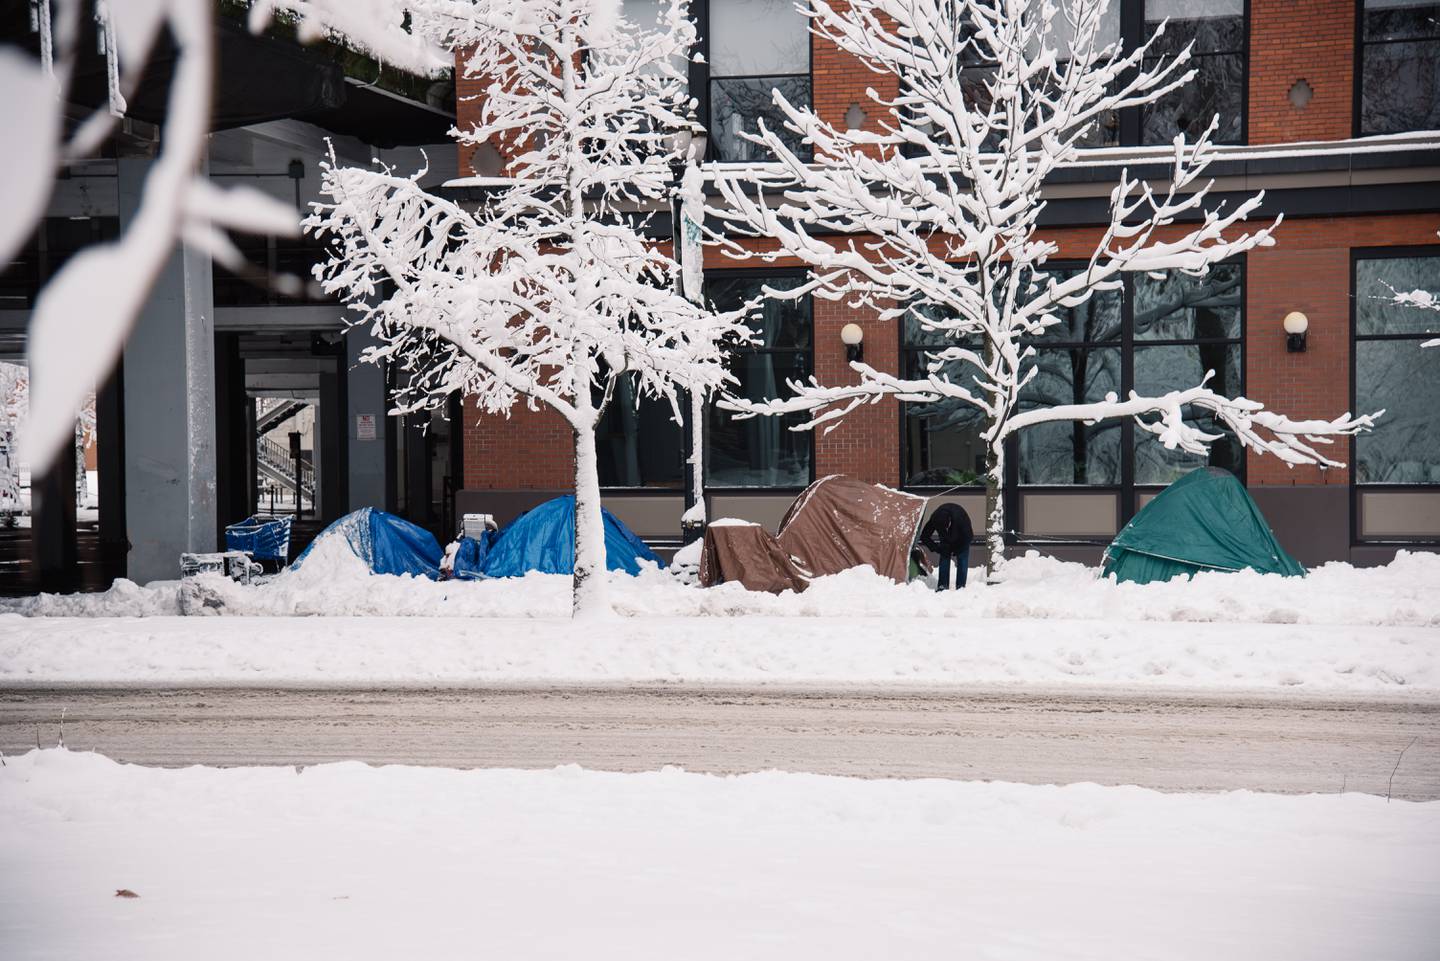 Want to Help Homeless People Out in the Cold? These Portland Shelters